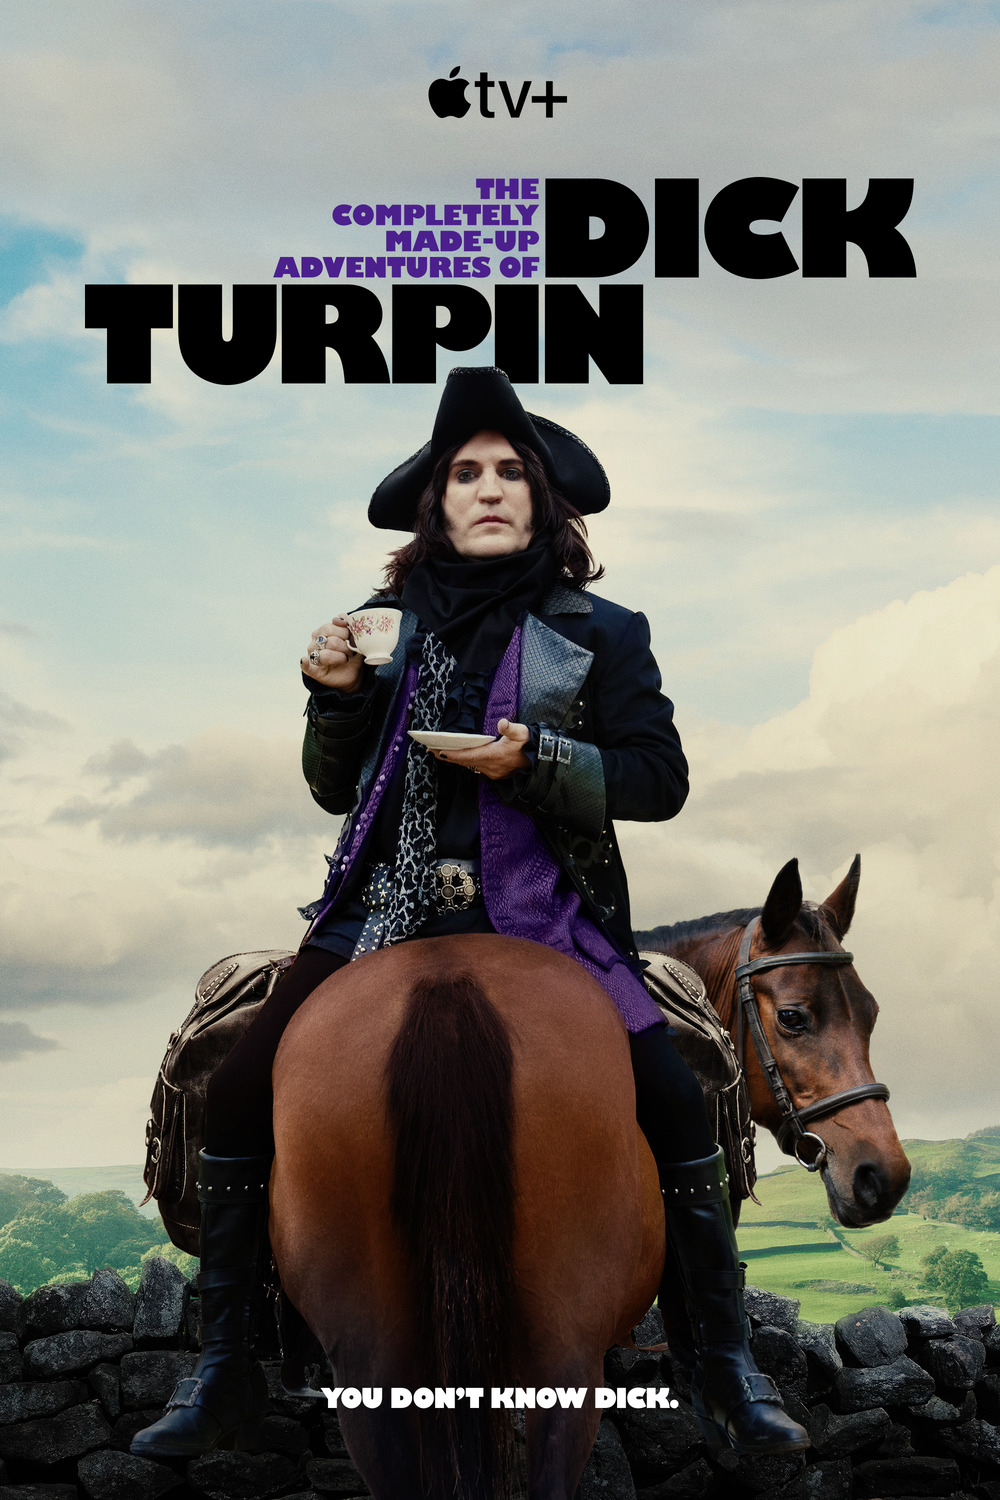 Extra Large TV Poster Image for The Completely Made-Up Adventures of Dick Turpin 